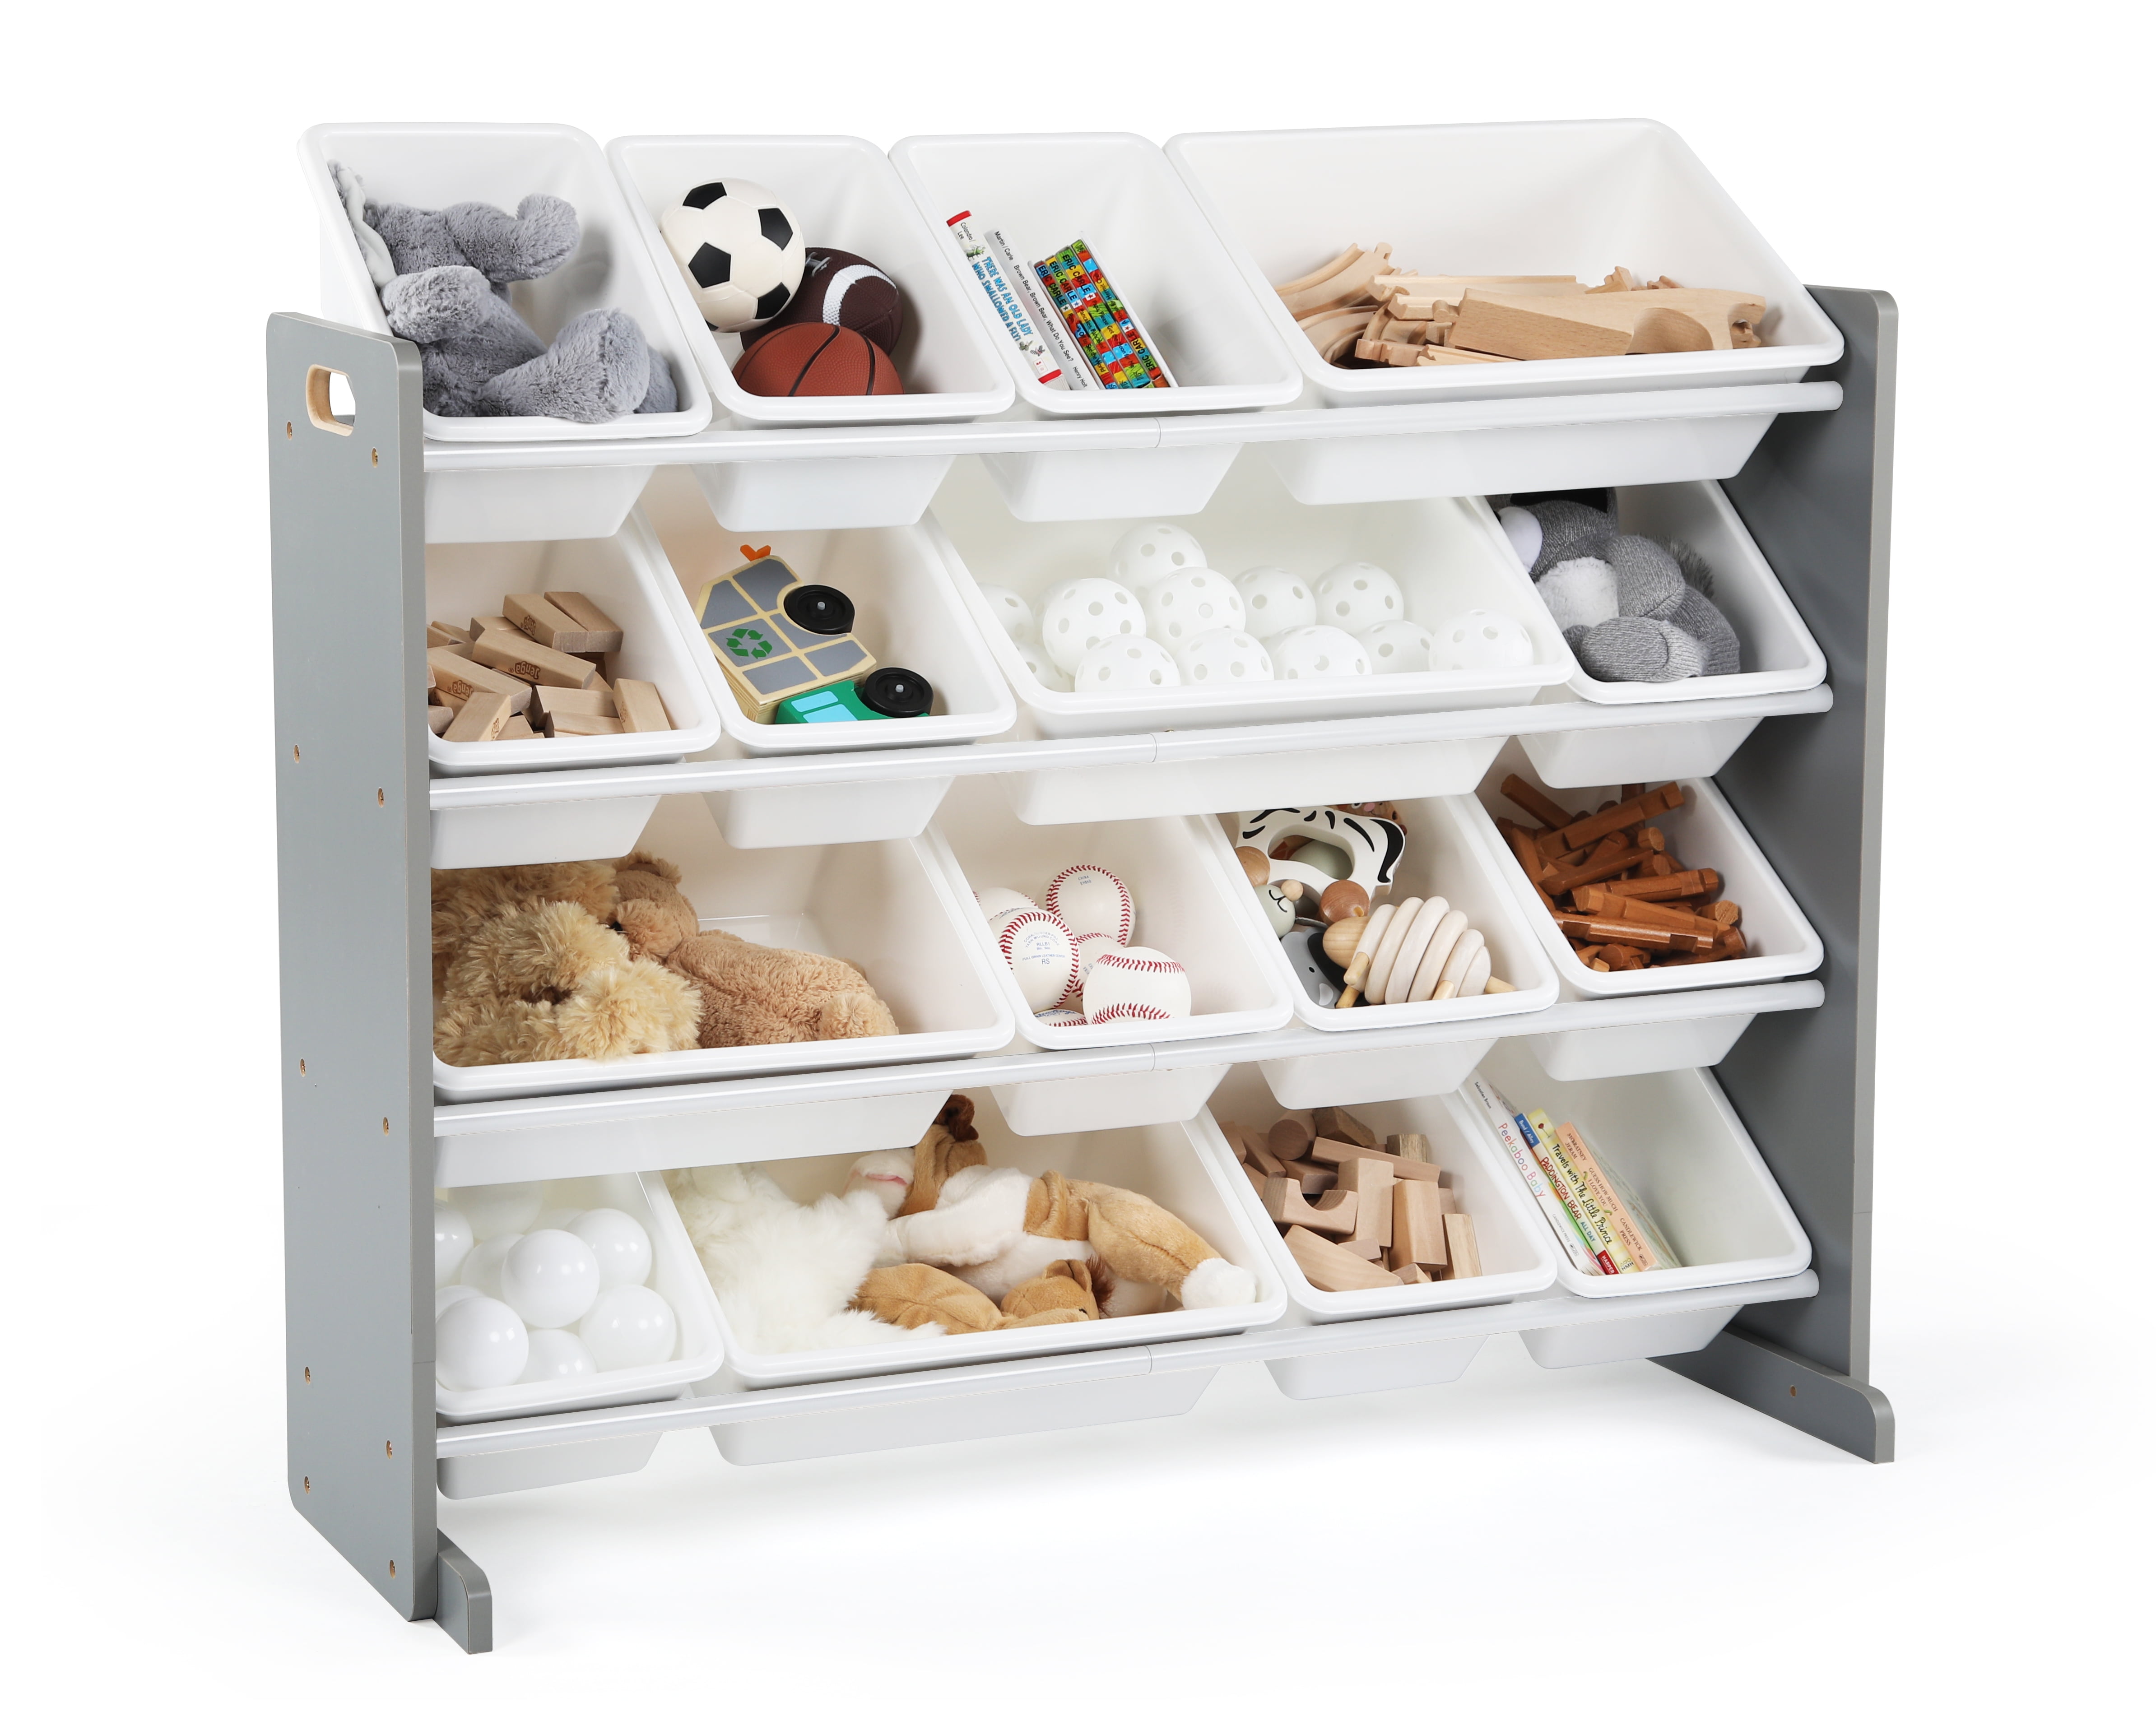 Humble Crew Children Wood and Plastic Organizer Rack with 16 Bins, Gray and  White 